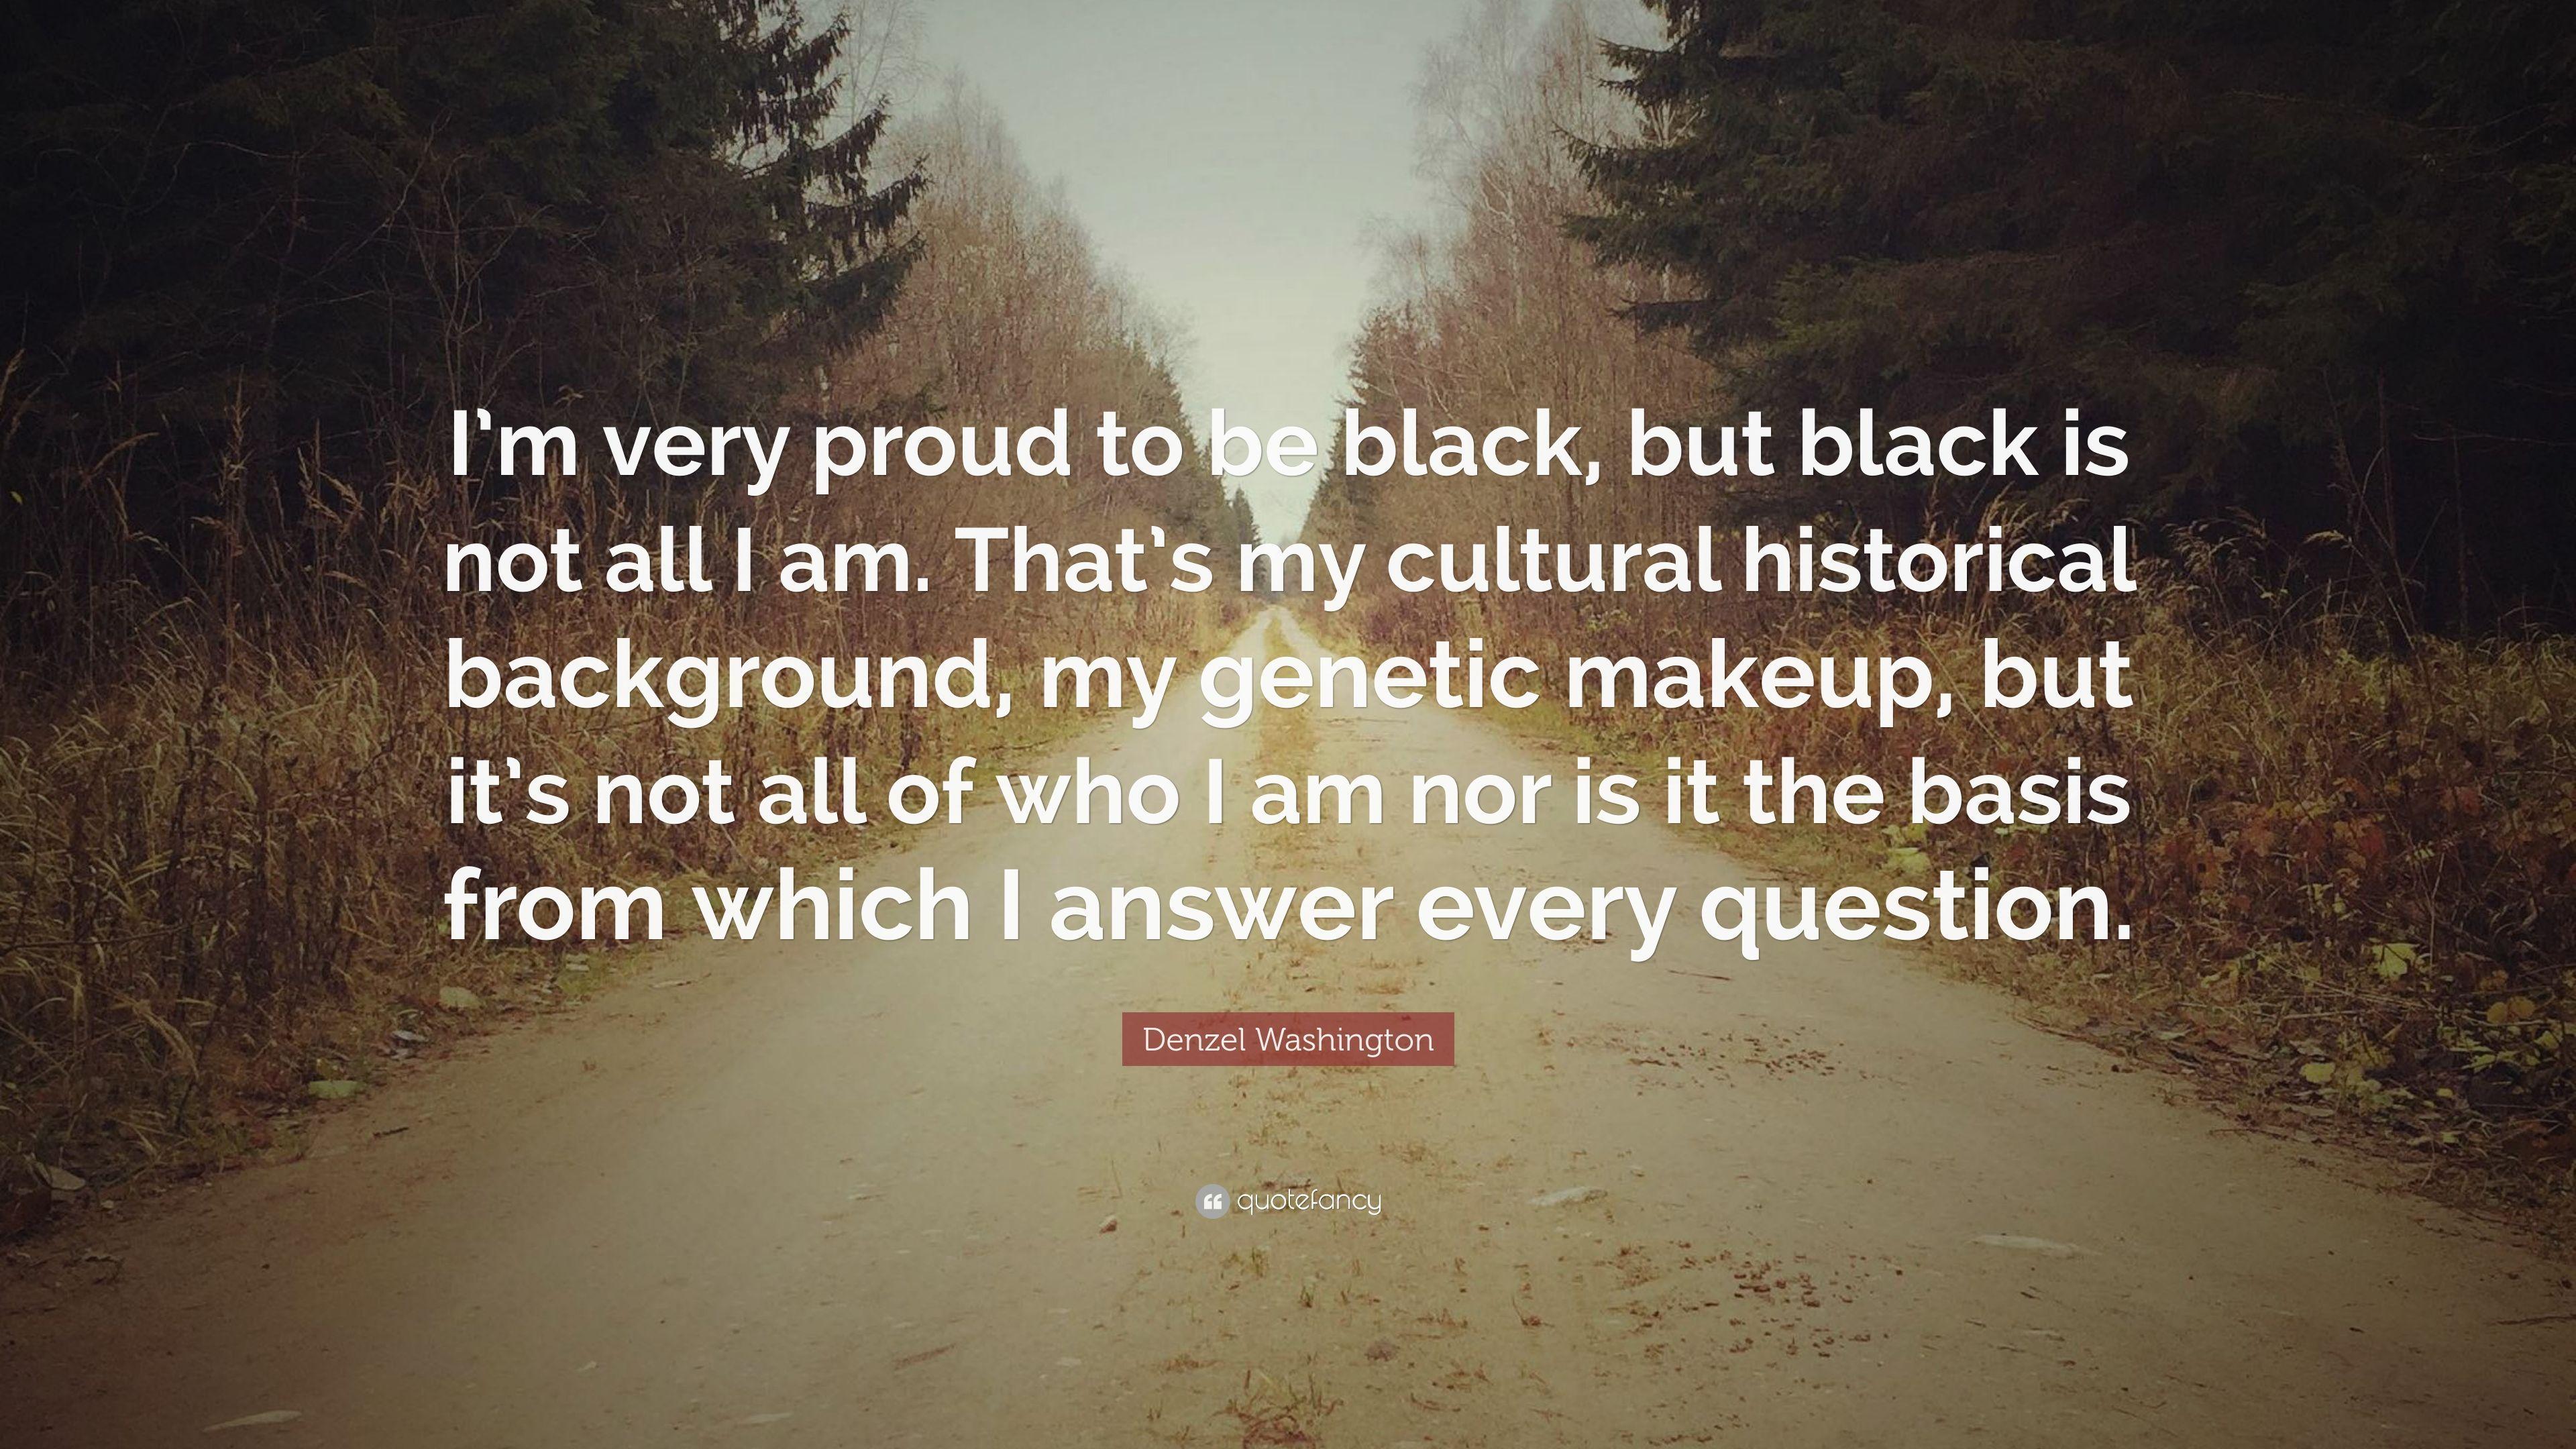 Denzel Washington Quote: “I'm very proud to be black, but black is